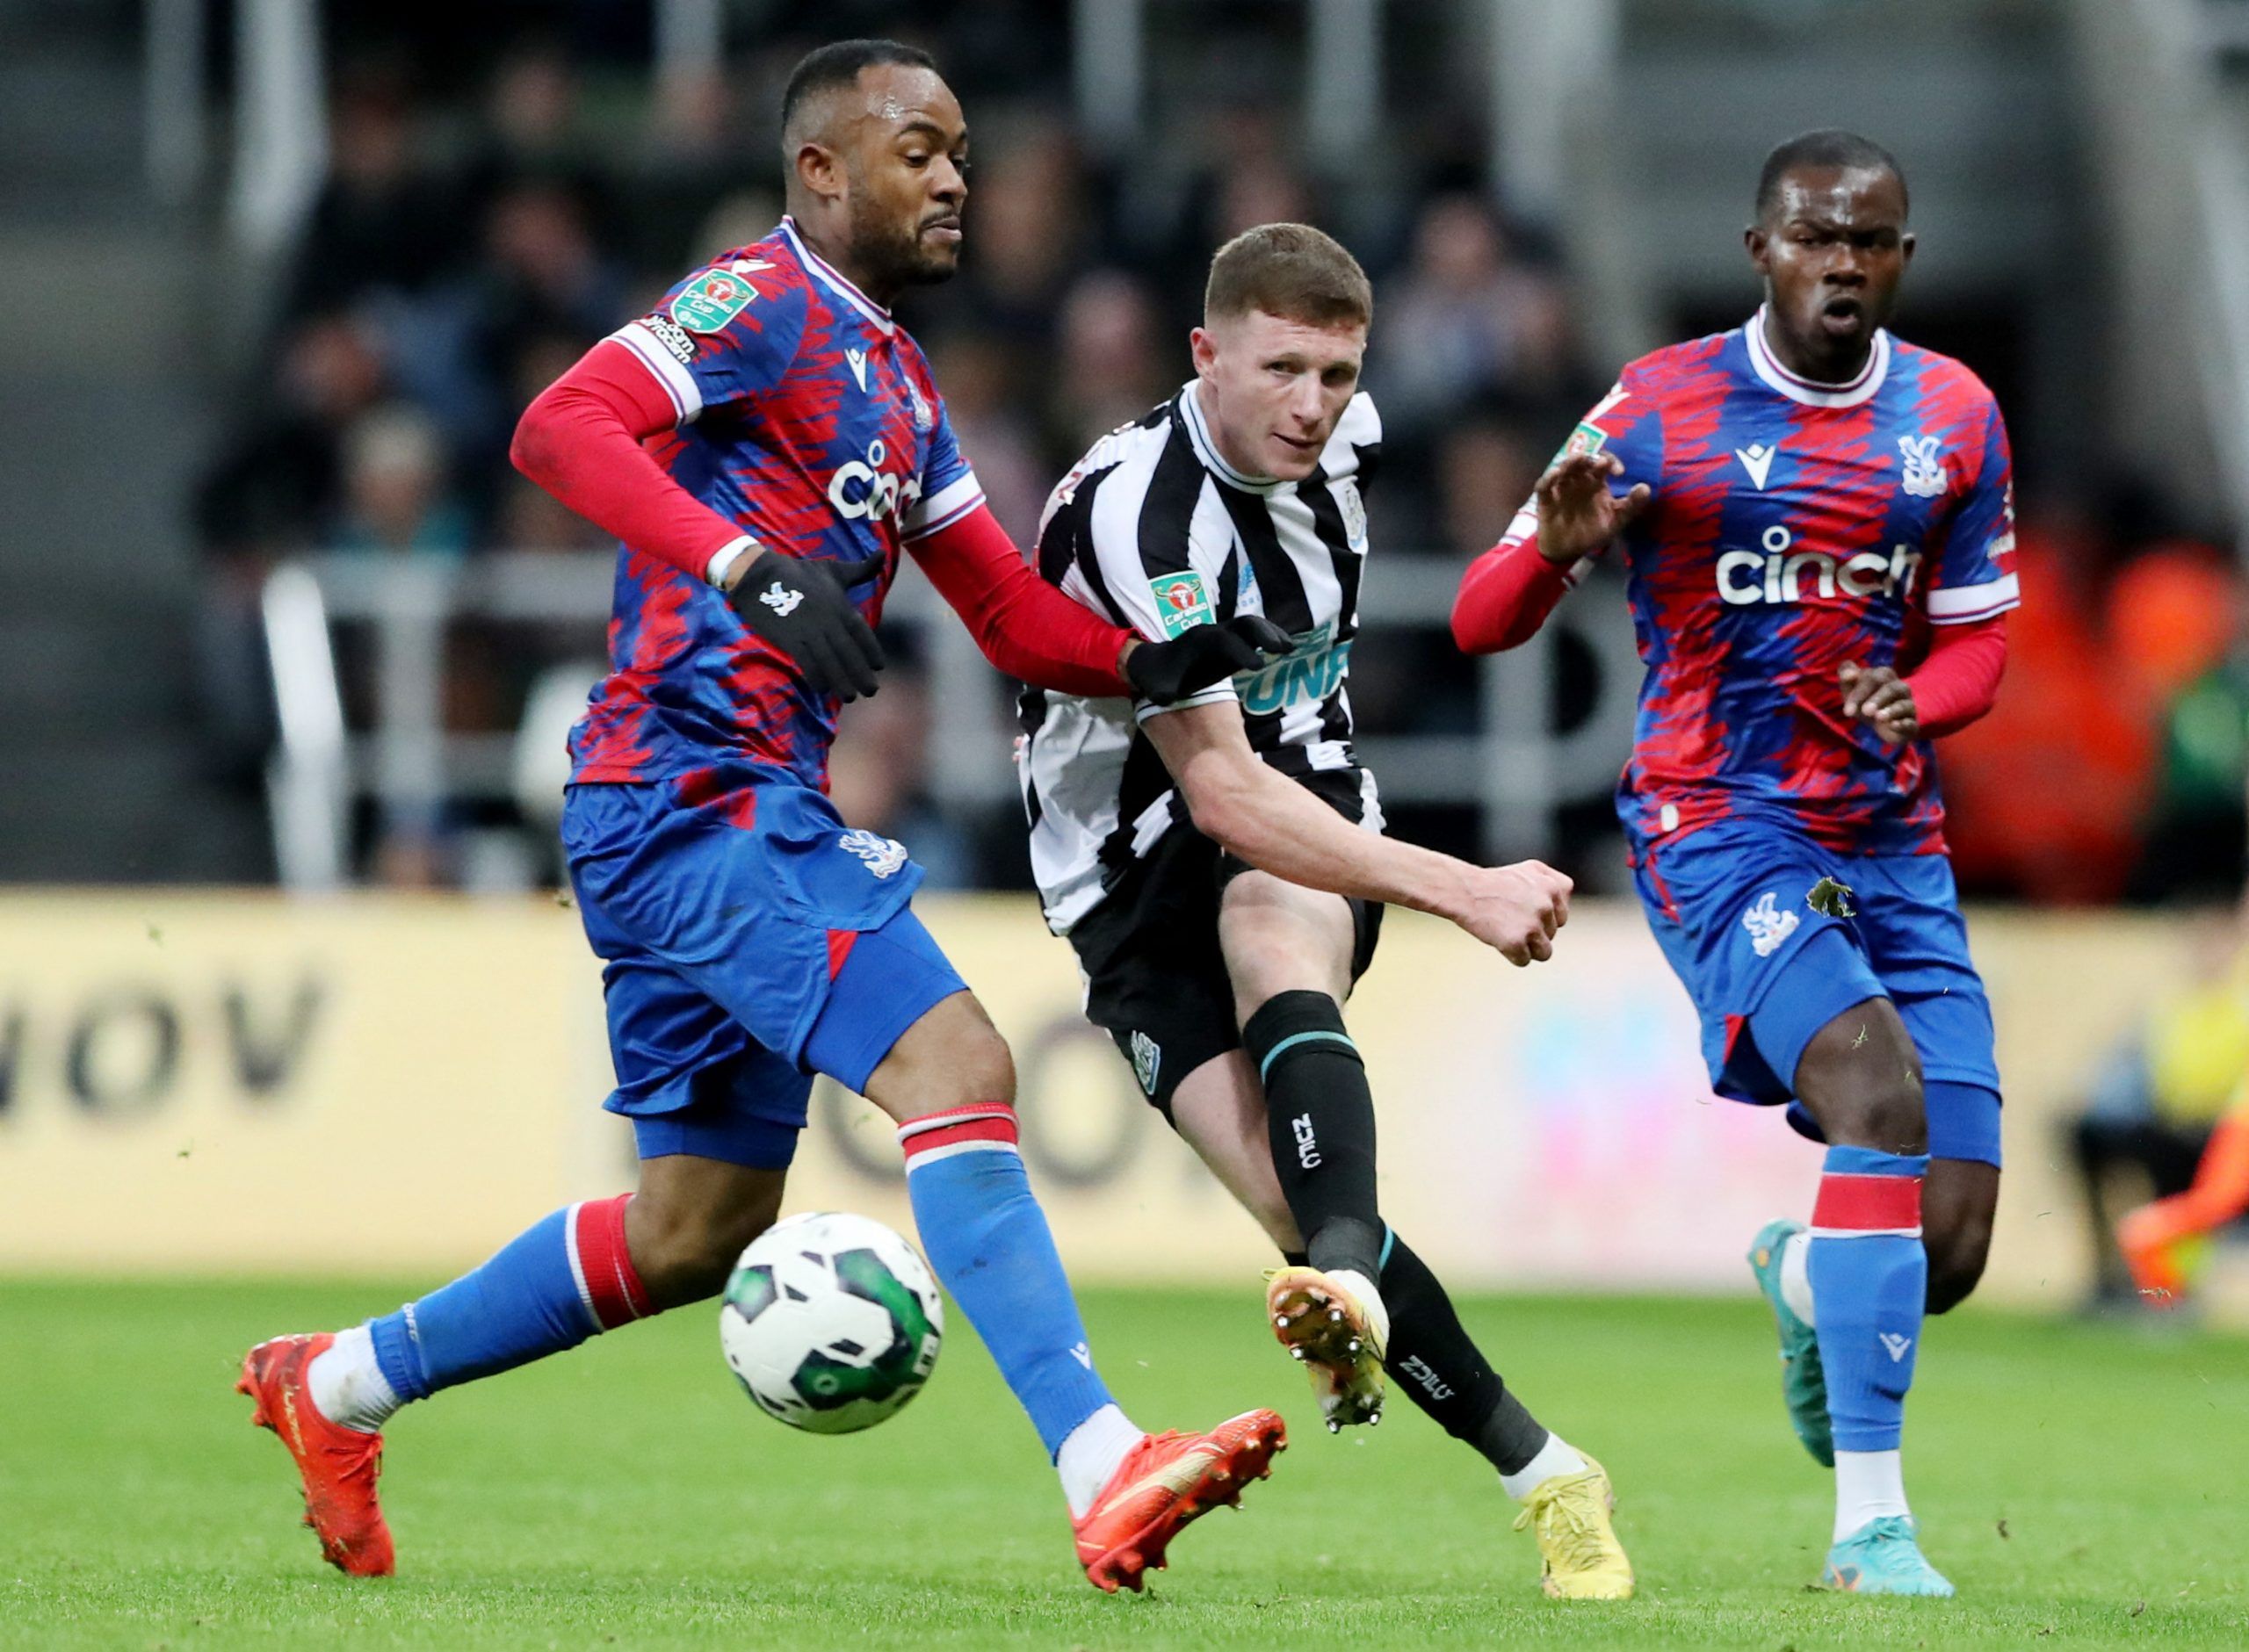 Soccer Football - Carabao Cup Third Round - Newcastle United v Crystal Palace - St James' Park, Newcastle, Britain - November 9, 2022 Crystal Palace's Jordan Ayew and Tyrick Mitchell in action with Newcastle United's Elliot Anderson REUTERS/Scott Heppell EDITORIAL USE ONLY. No use with unauthorized audio, video, data, fixture lists, club/league logos or 'live' services. Online in-match use limited to 75 images, no video emulation. No use in betting, games or single club /league/player publicatio